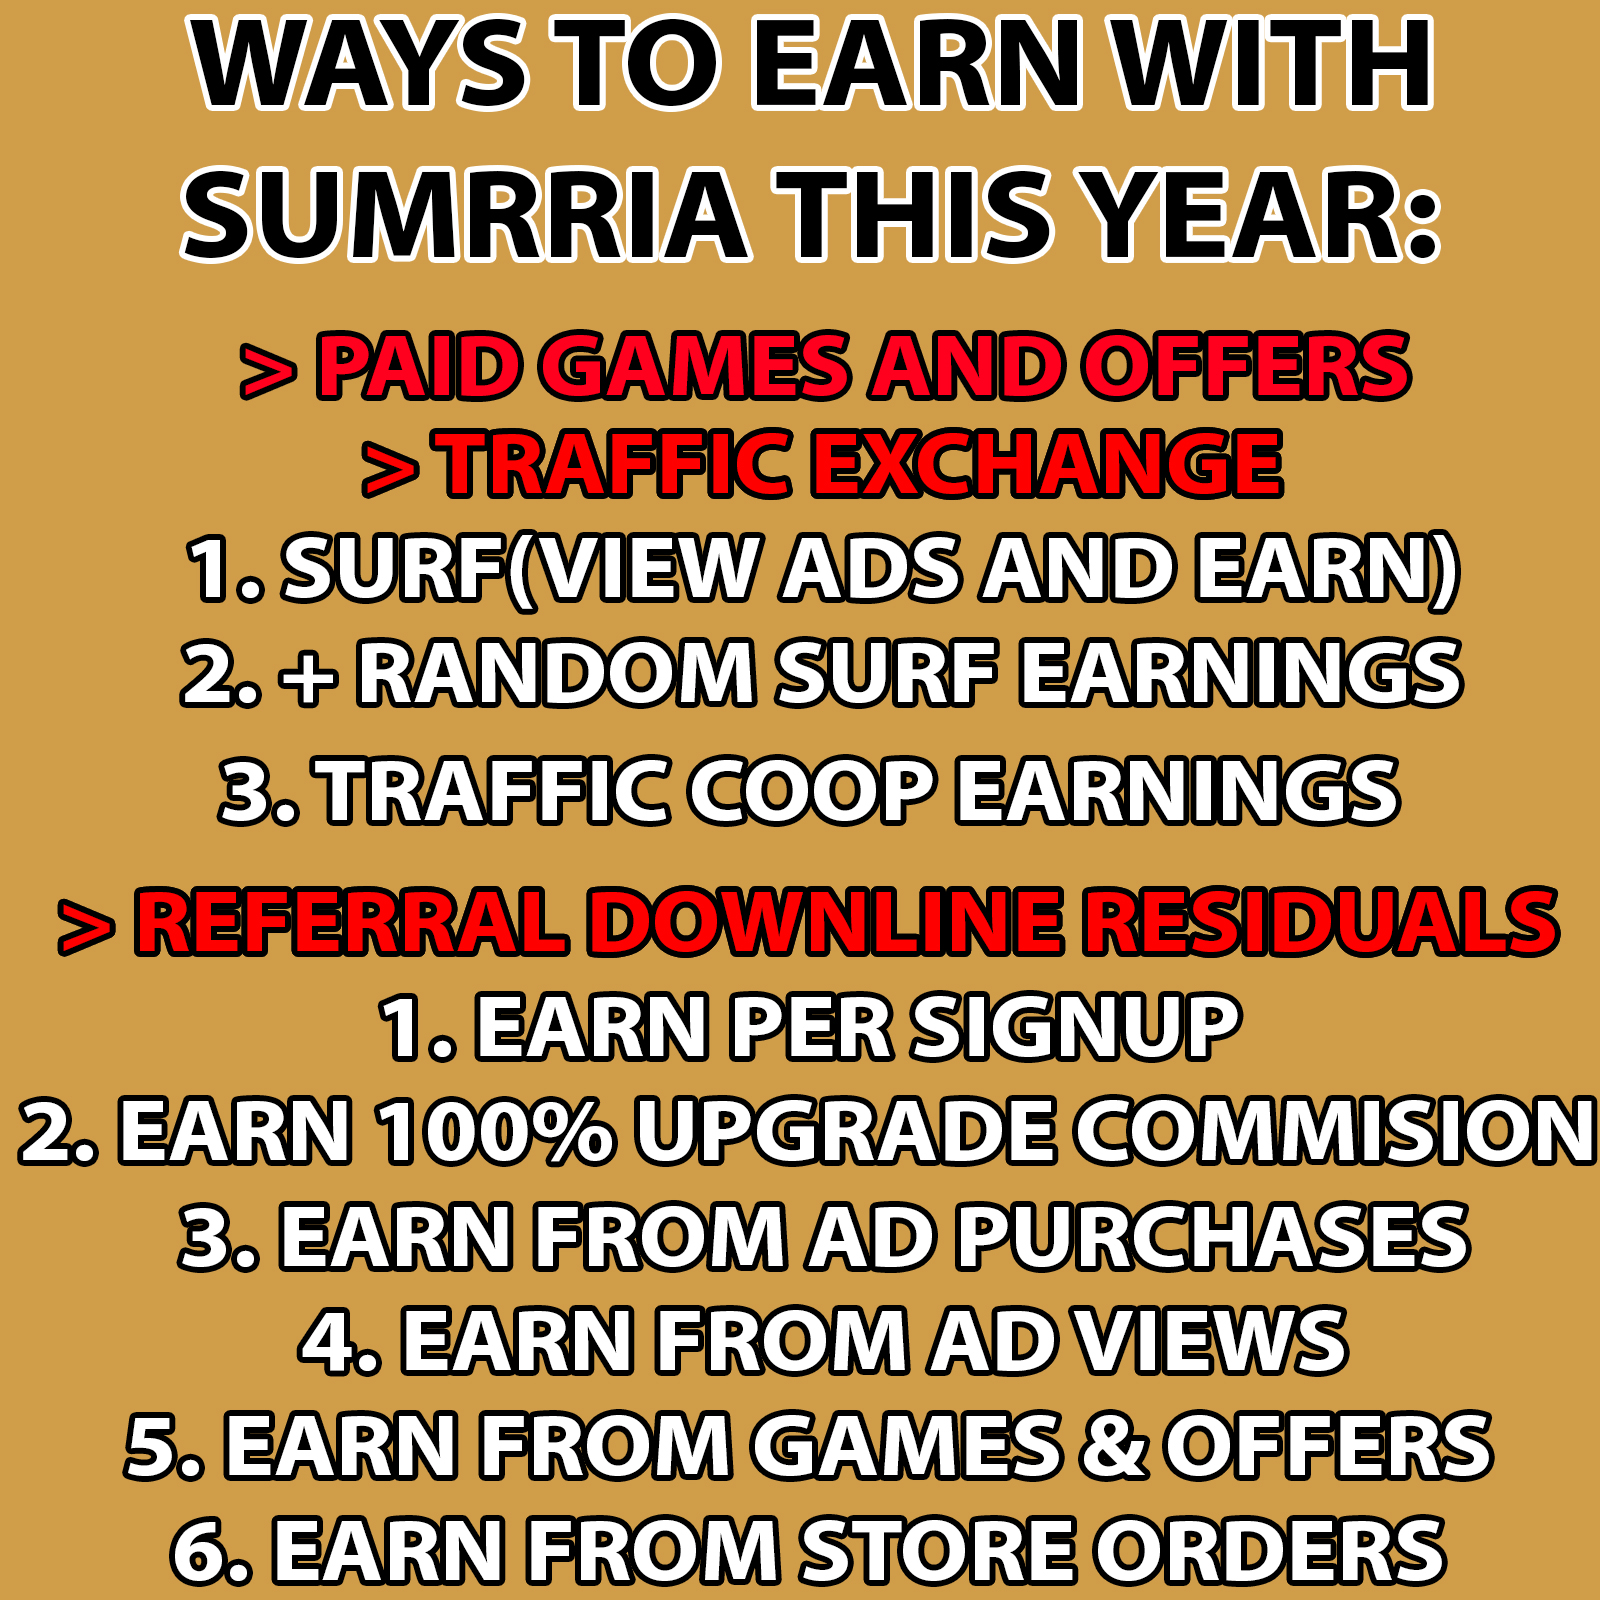  Grow your business plus earn with Sumrria